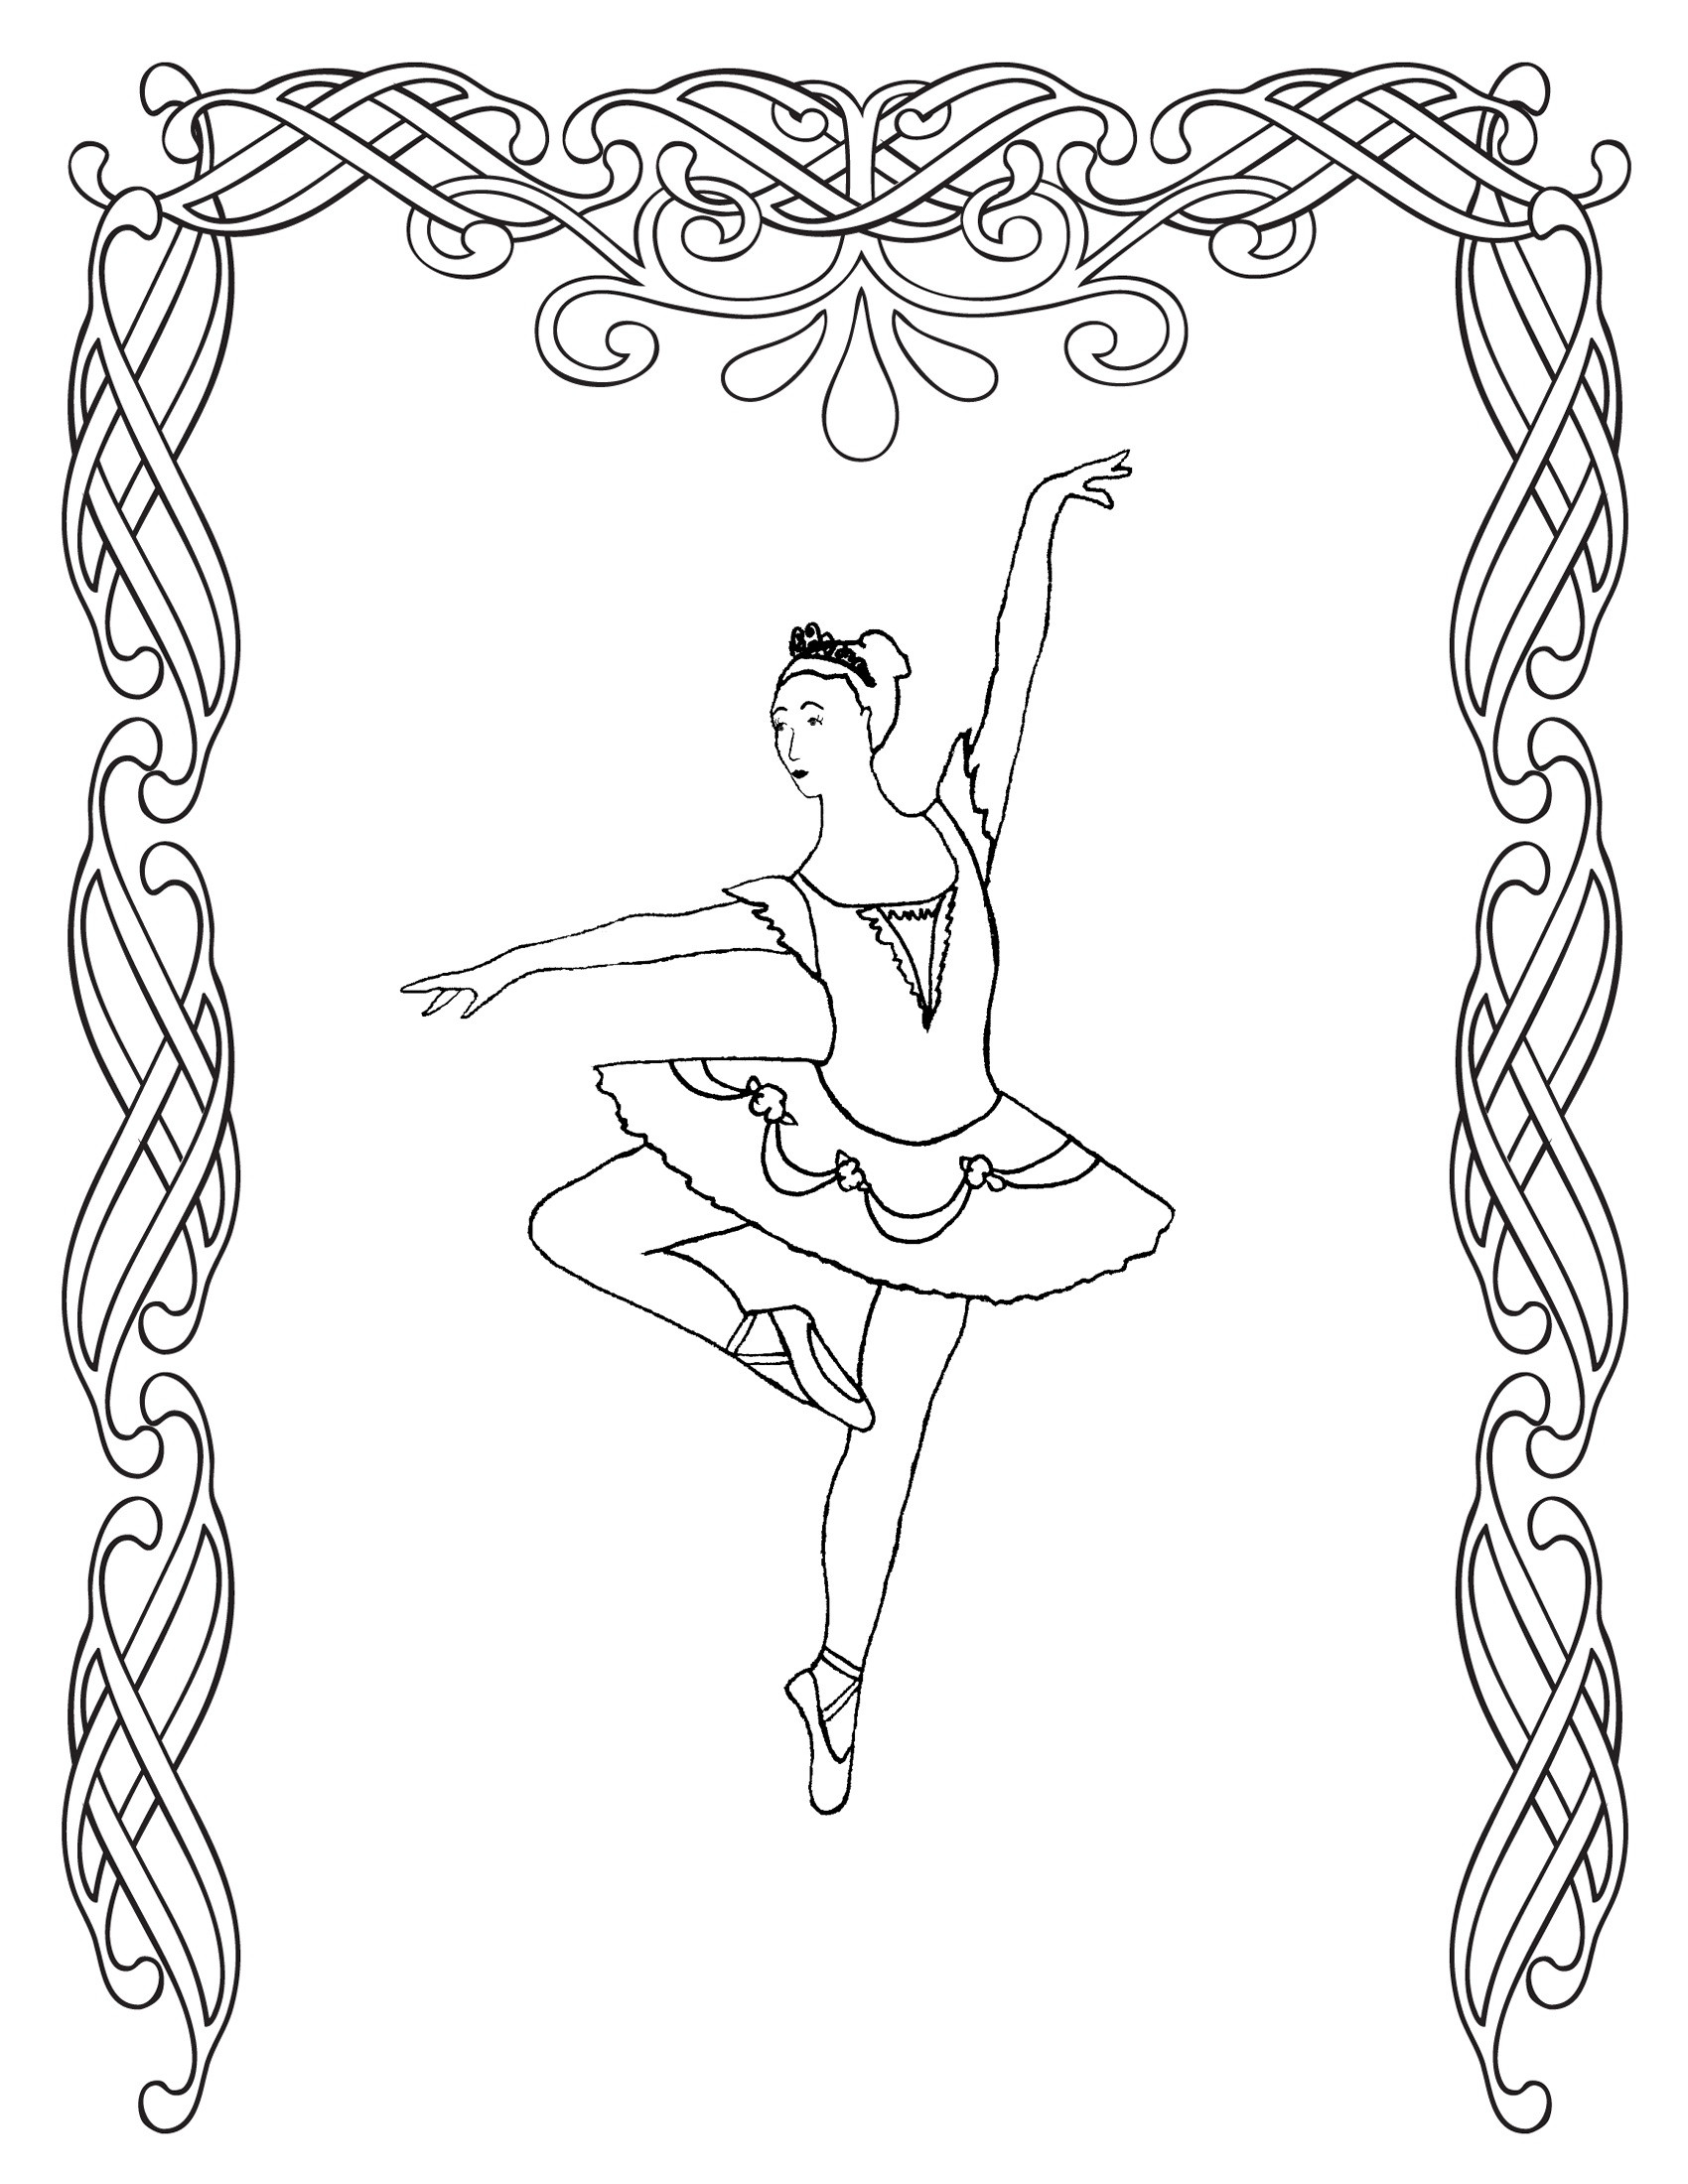 Balerina Coloring Pages
 Free Printable Ballet Coloring Pages For Kids